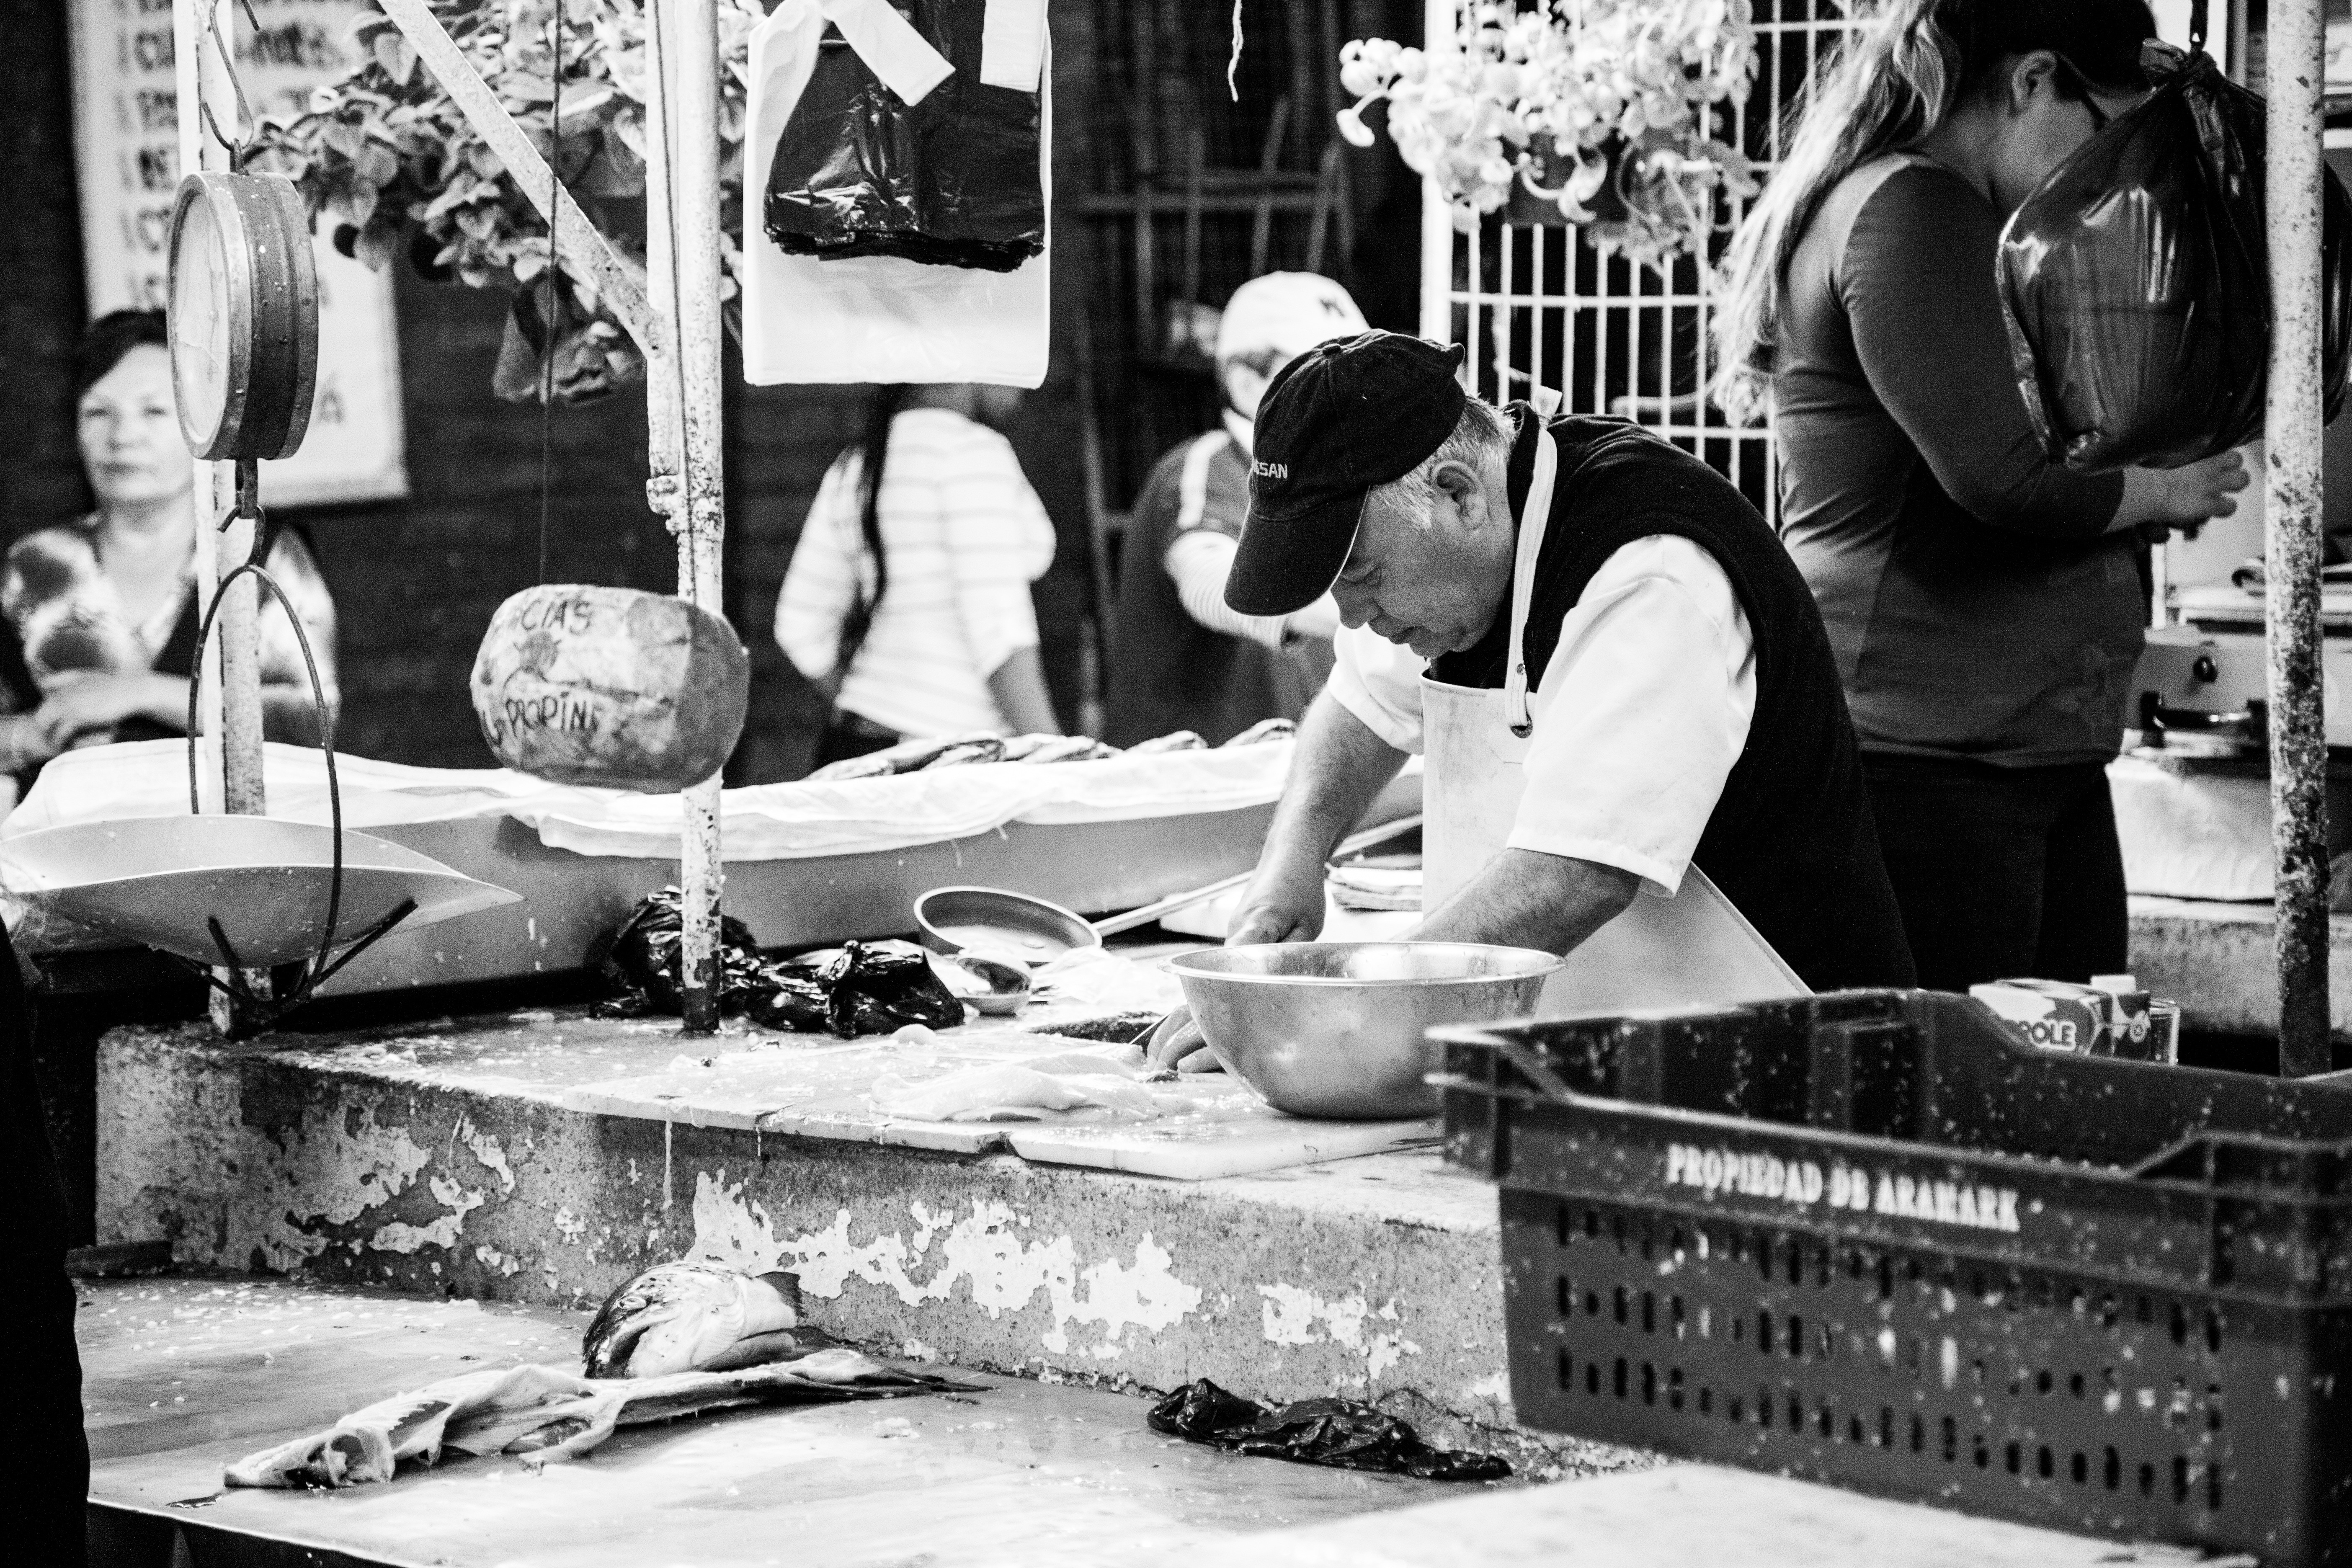 man selling fish in wet market grayscale photo